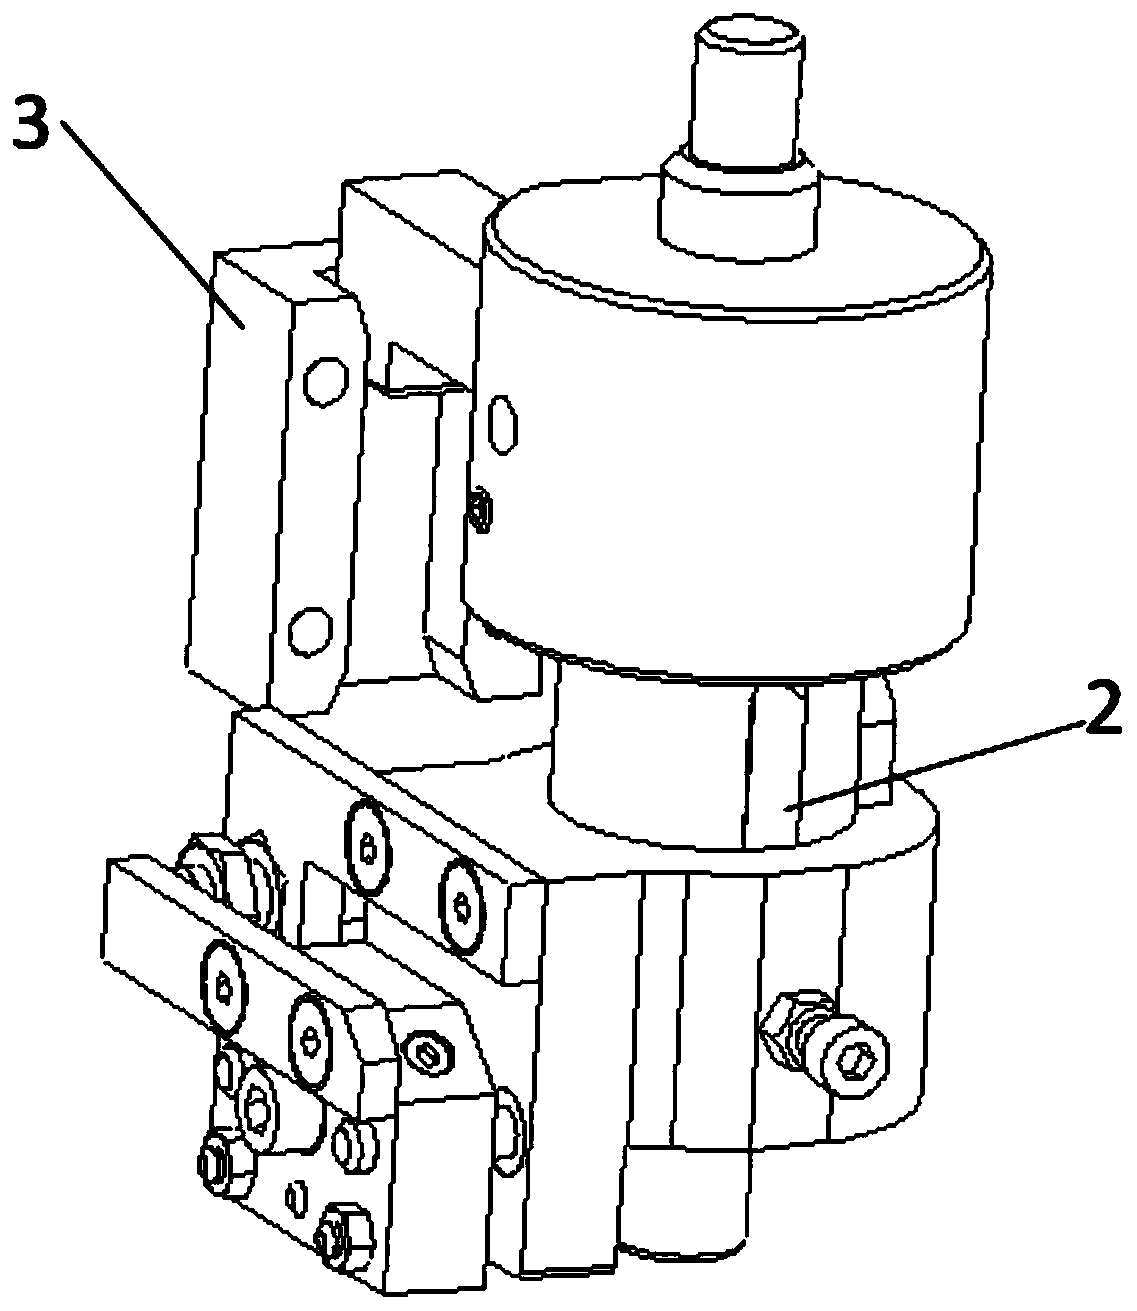 Fixture with functions of locating detection and clamping expansion